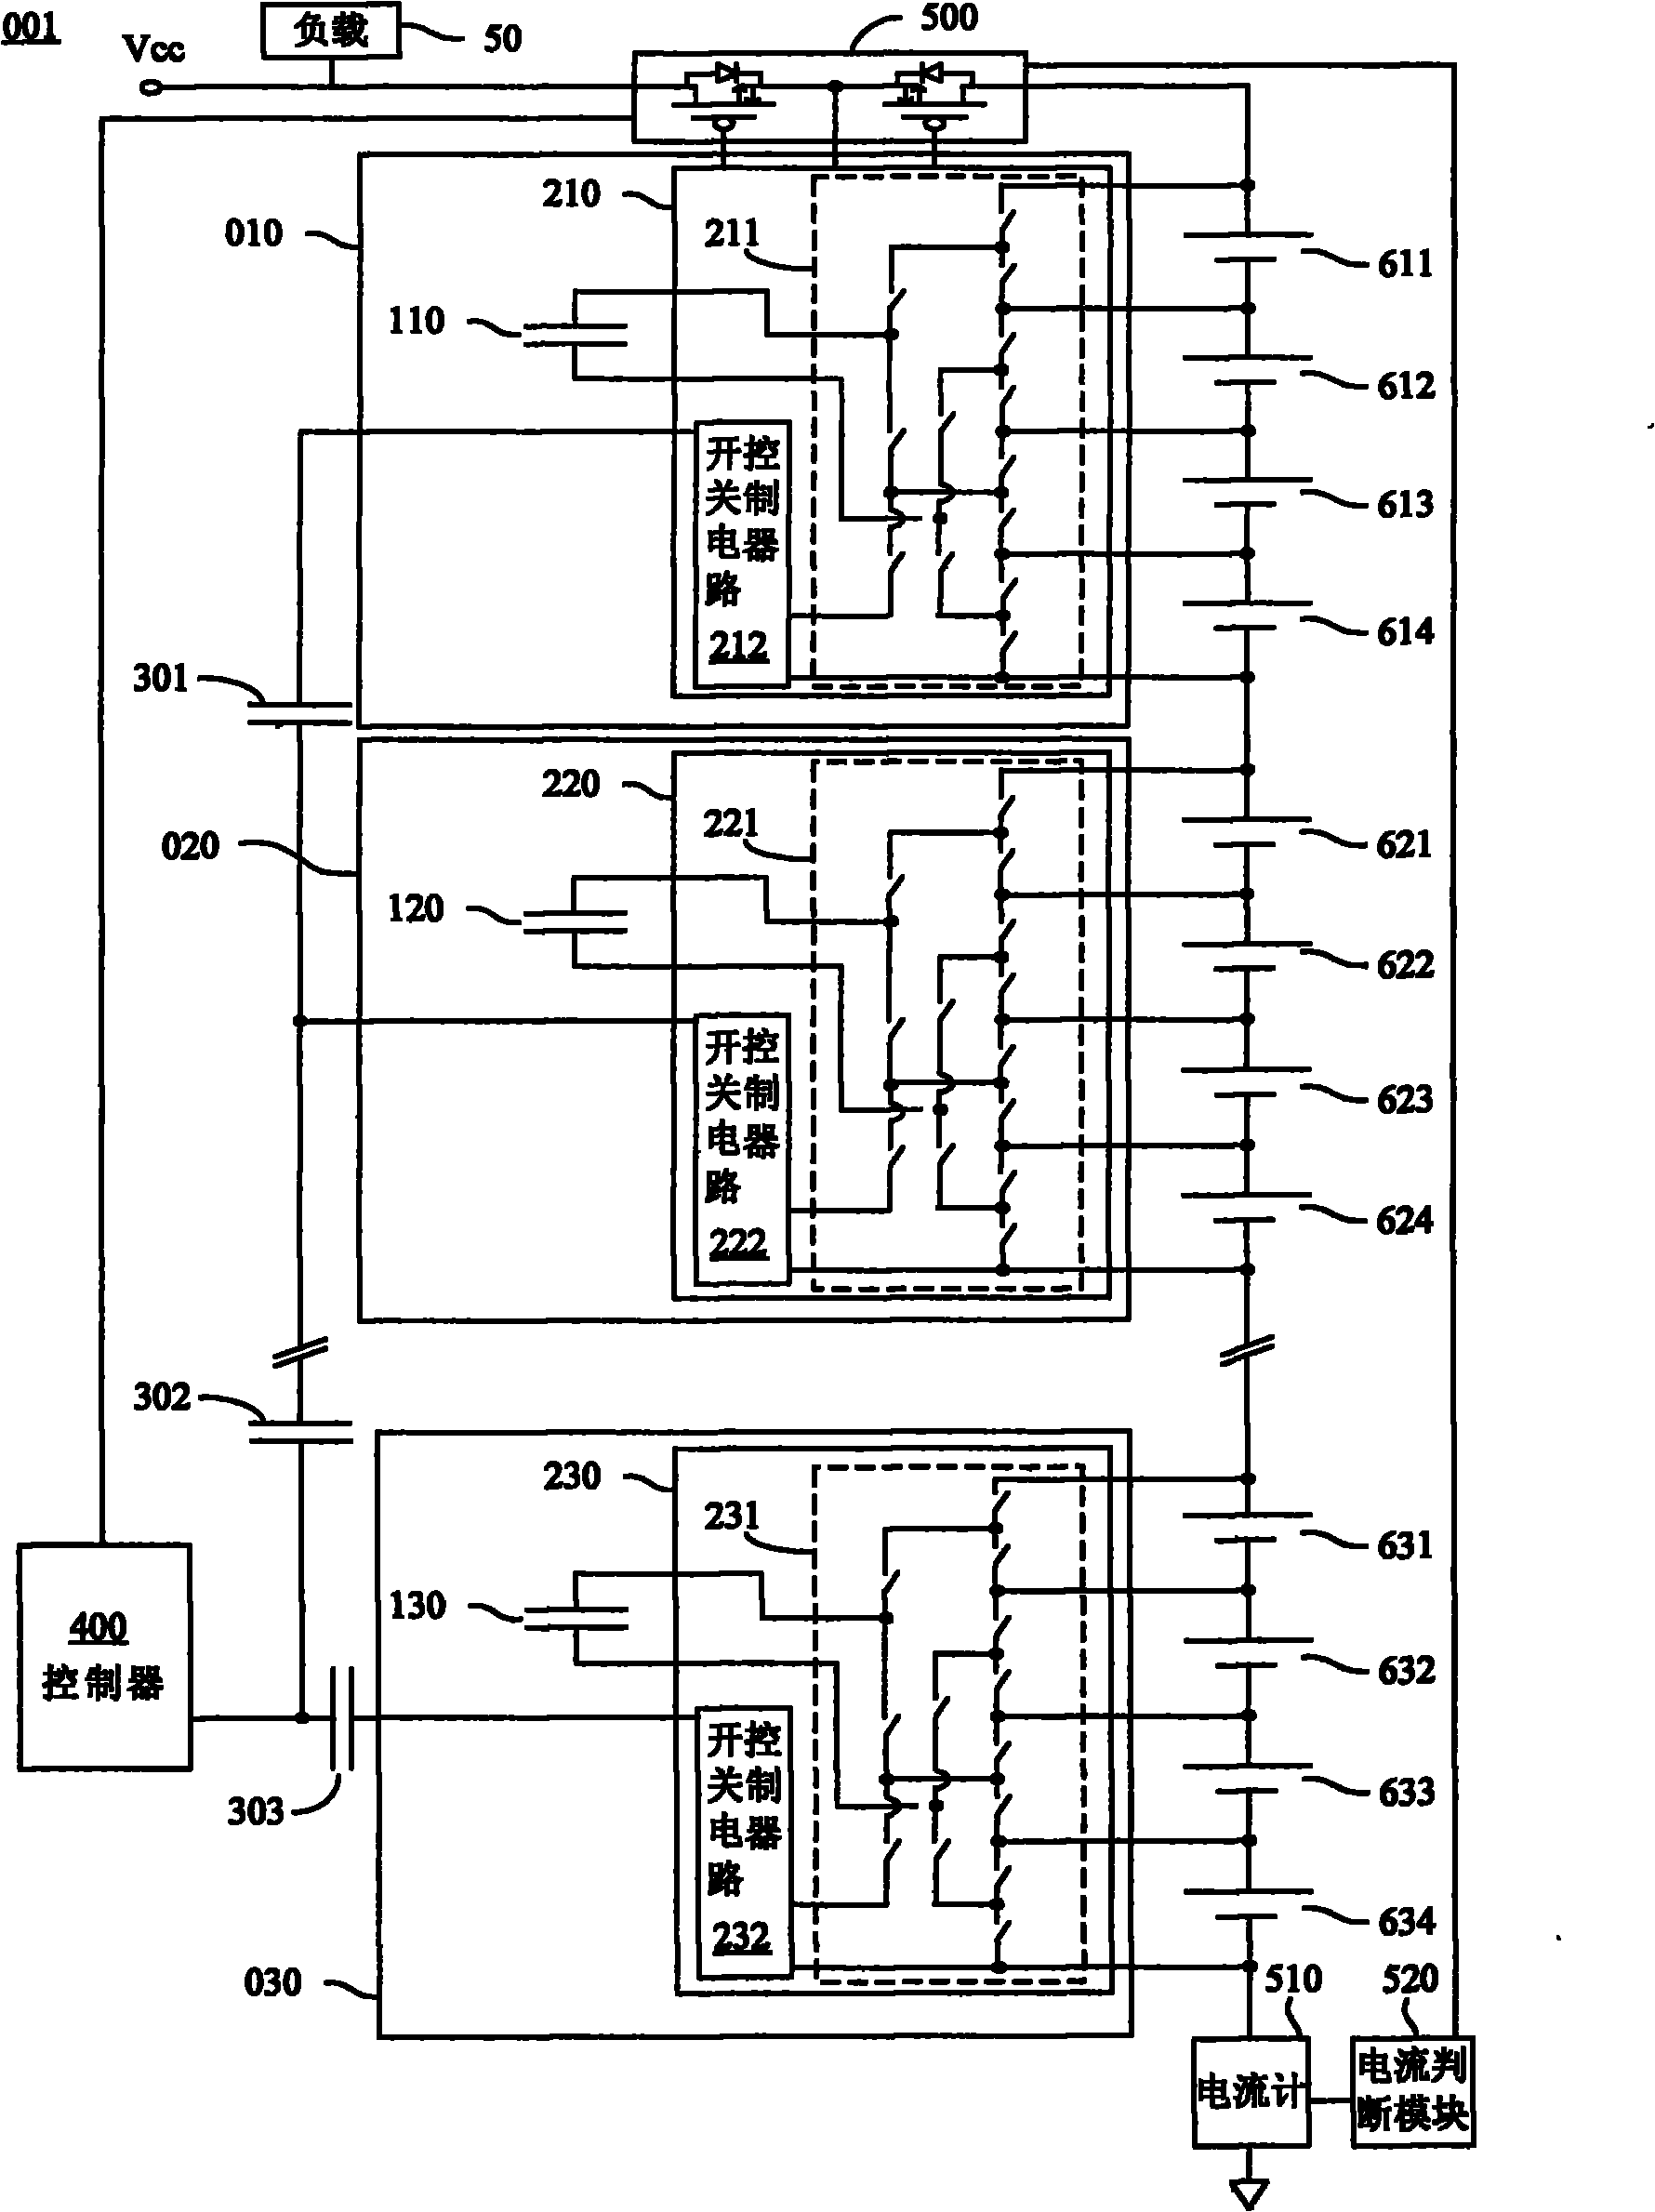 Battery monitoring device and method thereof